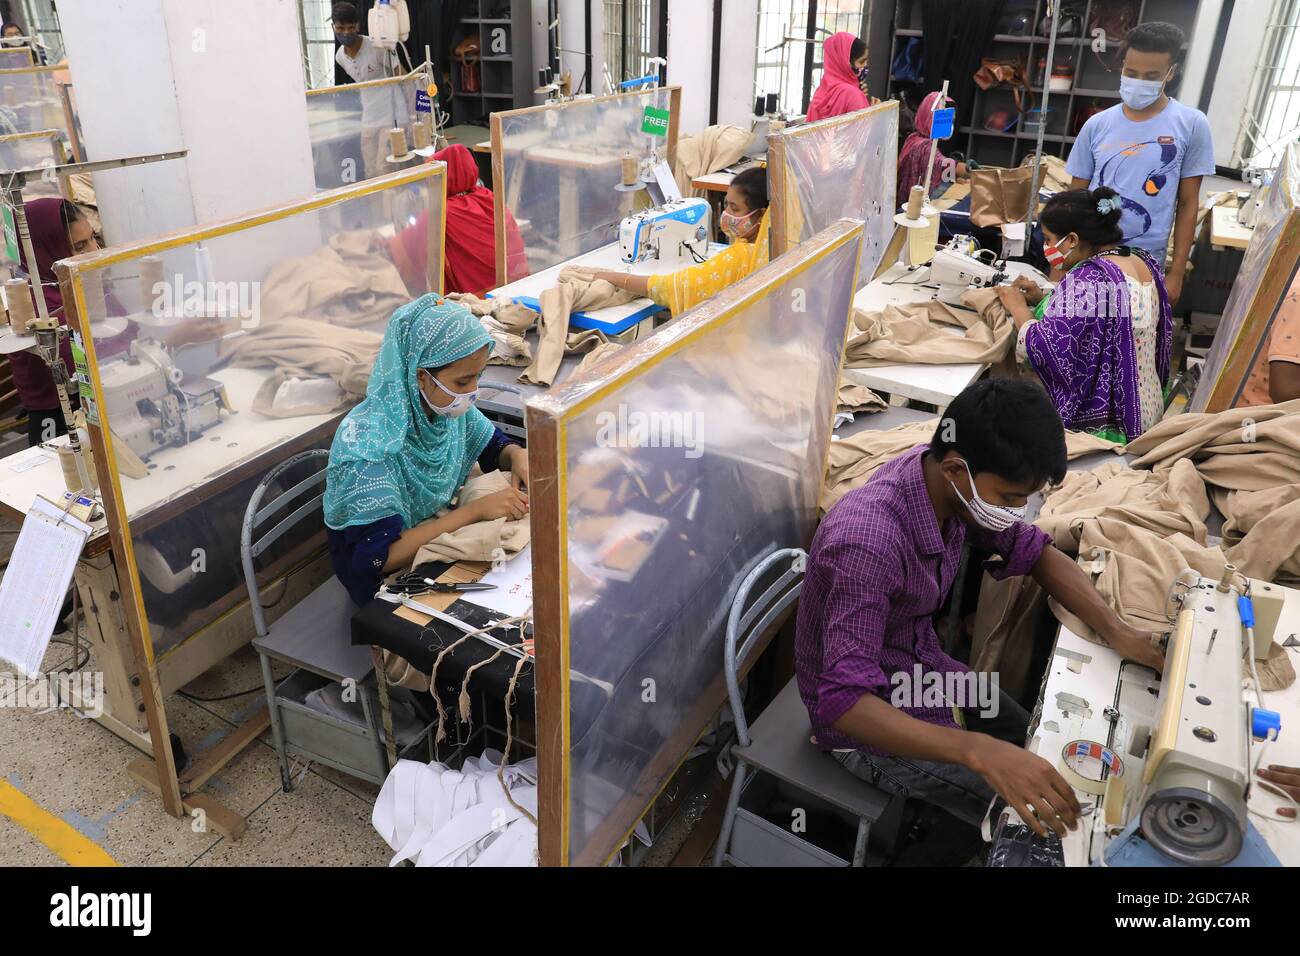 Dhaka, Bangladesh, August 12, 2021: A woman manufactures clothes in a textile factory in the Gazipur industrial zone on the outskirts of Dhaka. Despite the lockdown measures, imposed across the country by the coronavirus, Bangladeshi textile factories have resumed production of clothing, which They supply the most important brands in the world and represent 84% of the country's total exports. Bangladesh is one of the largest textile exporters in the world employing more than 4 million people, most of them women. Bangladesh's labor force is one of the cheapest in the region, and as a result, it Stock Photo